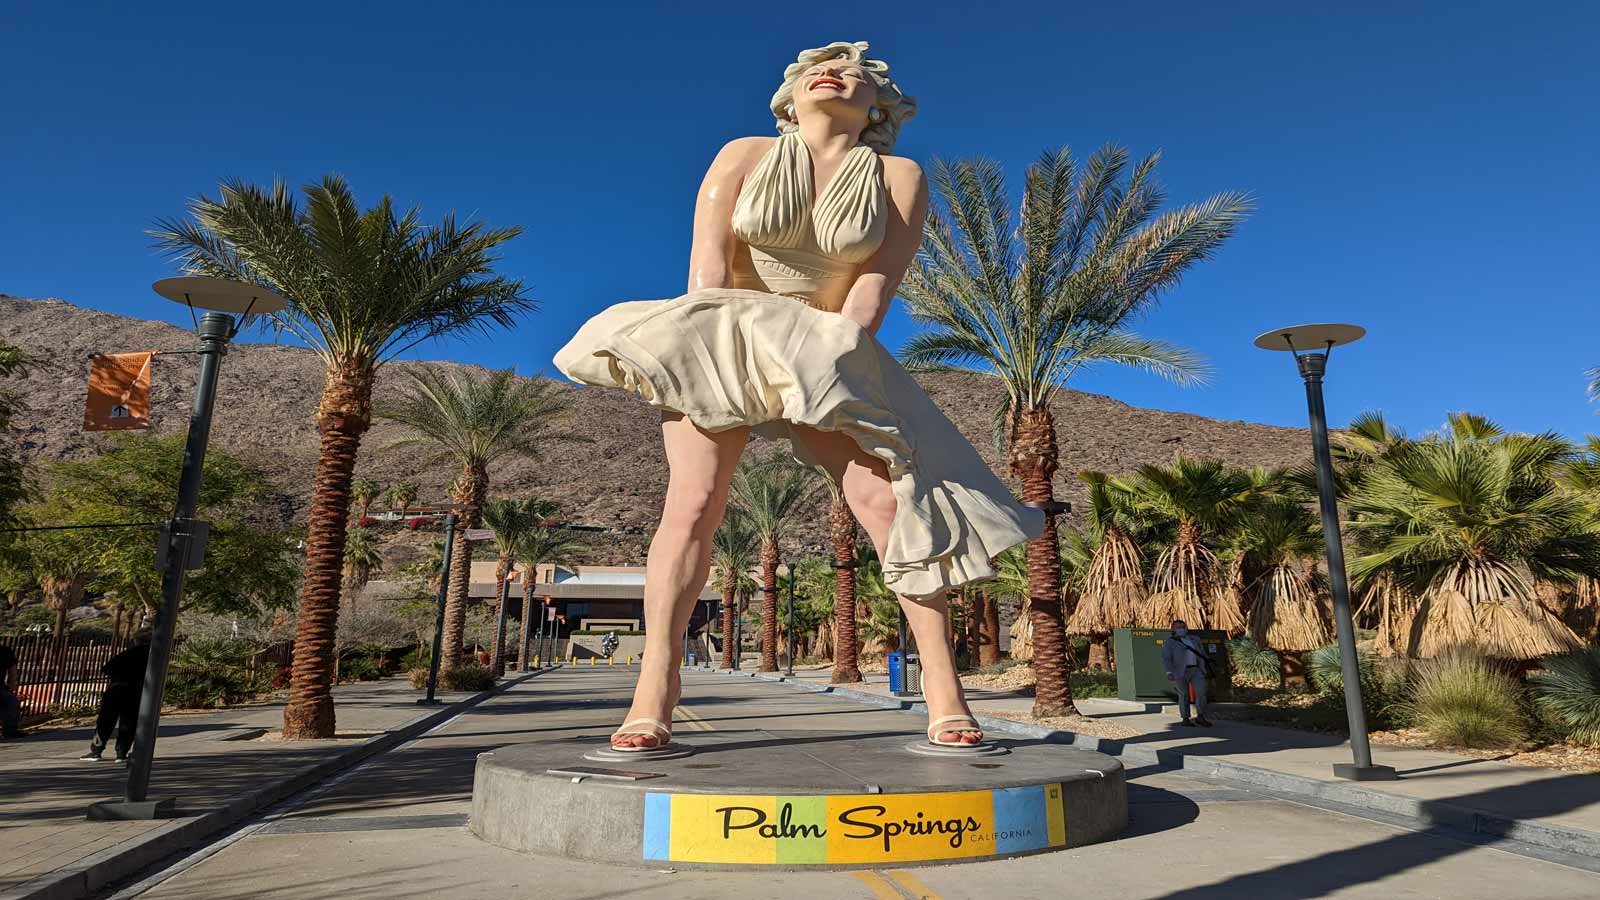 <p><span>The dreamy little retro oasis known as Palm Springs is nestled alongside the San Jose Mountains in Southern California. A one-time home away from home spot for old Hollywood stars like Frank Sinatra, Elvis Presley, and Liberace, this desert town is a fabulous vacation destination.</span></p> <p><span>My husband and I love this city so much that we’re heading back this summer for another quick getaway. From incredible midcentury architecture, a fantastic food scene, majestic natural beauty, and a hopping nightlife, there are copious sights and experiences to enjoy. It’s also a great place to relax, unwind, and have a cocktail or three by the hotel pool.</span></p> <p><span>Here is my firsthand account of how to spend a long weekend in sunny Palm Springs, California.</span></p>